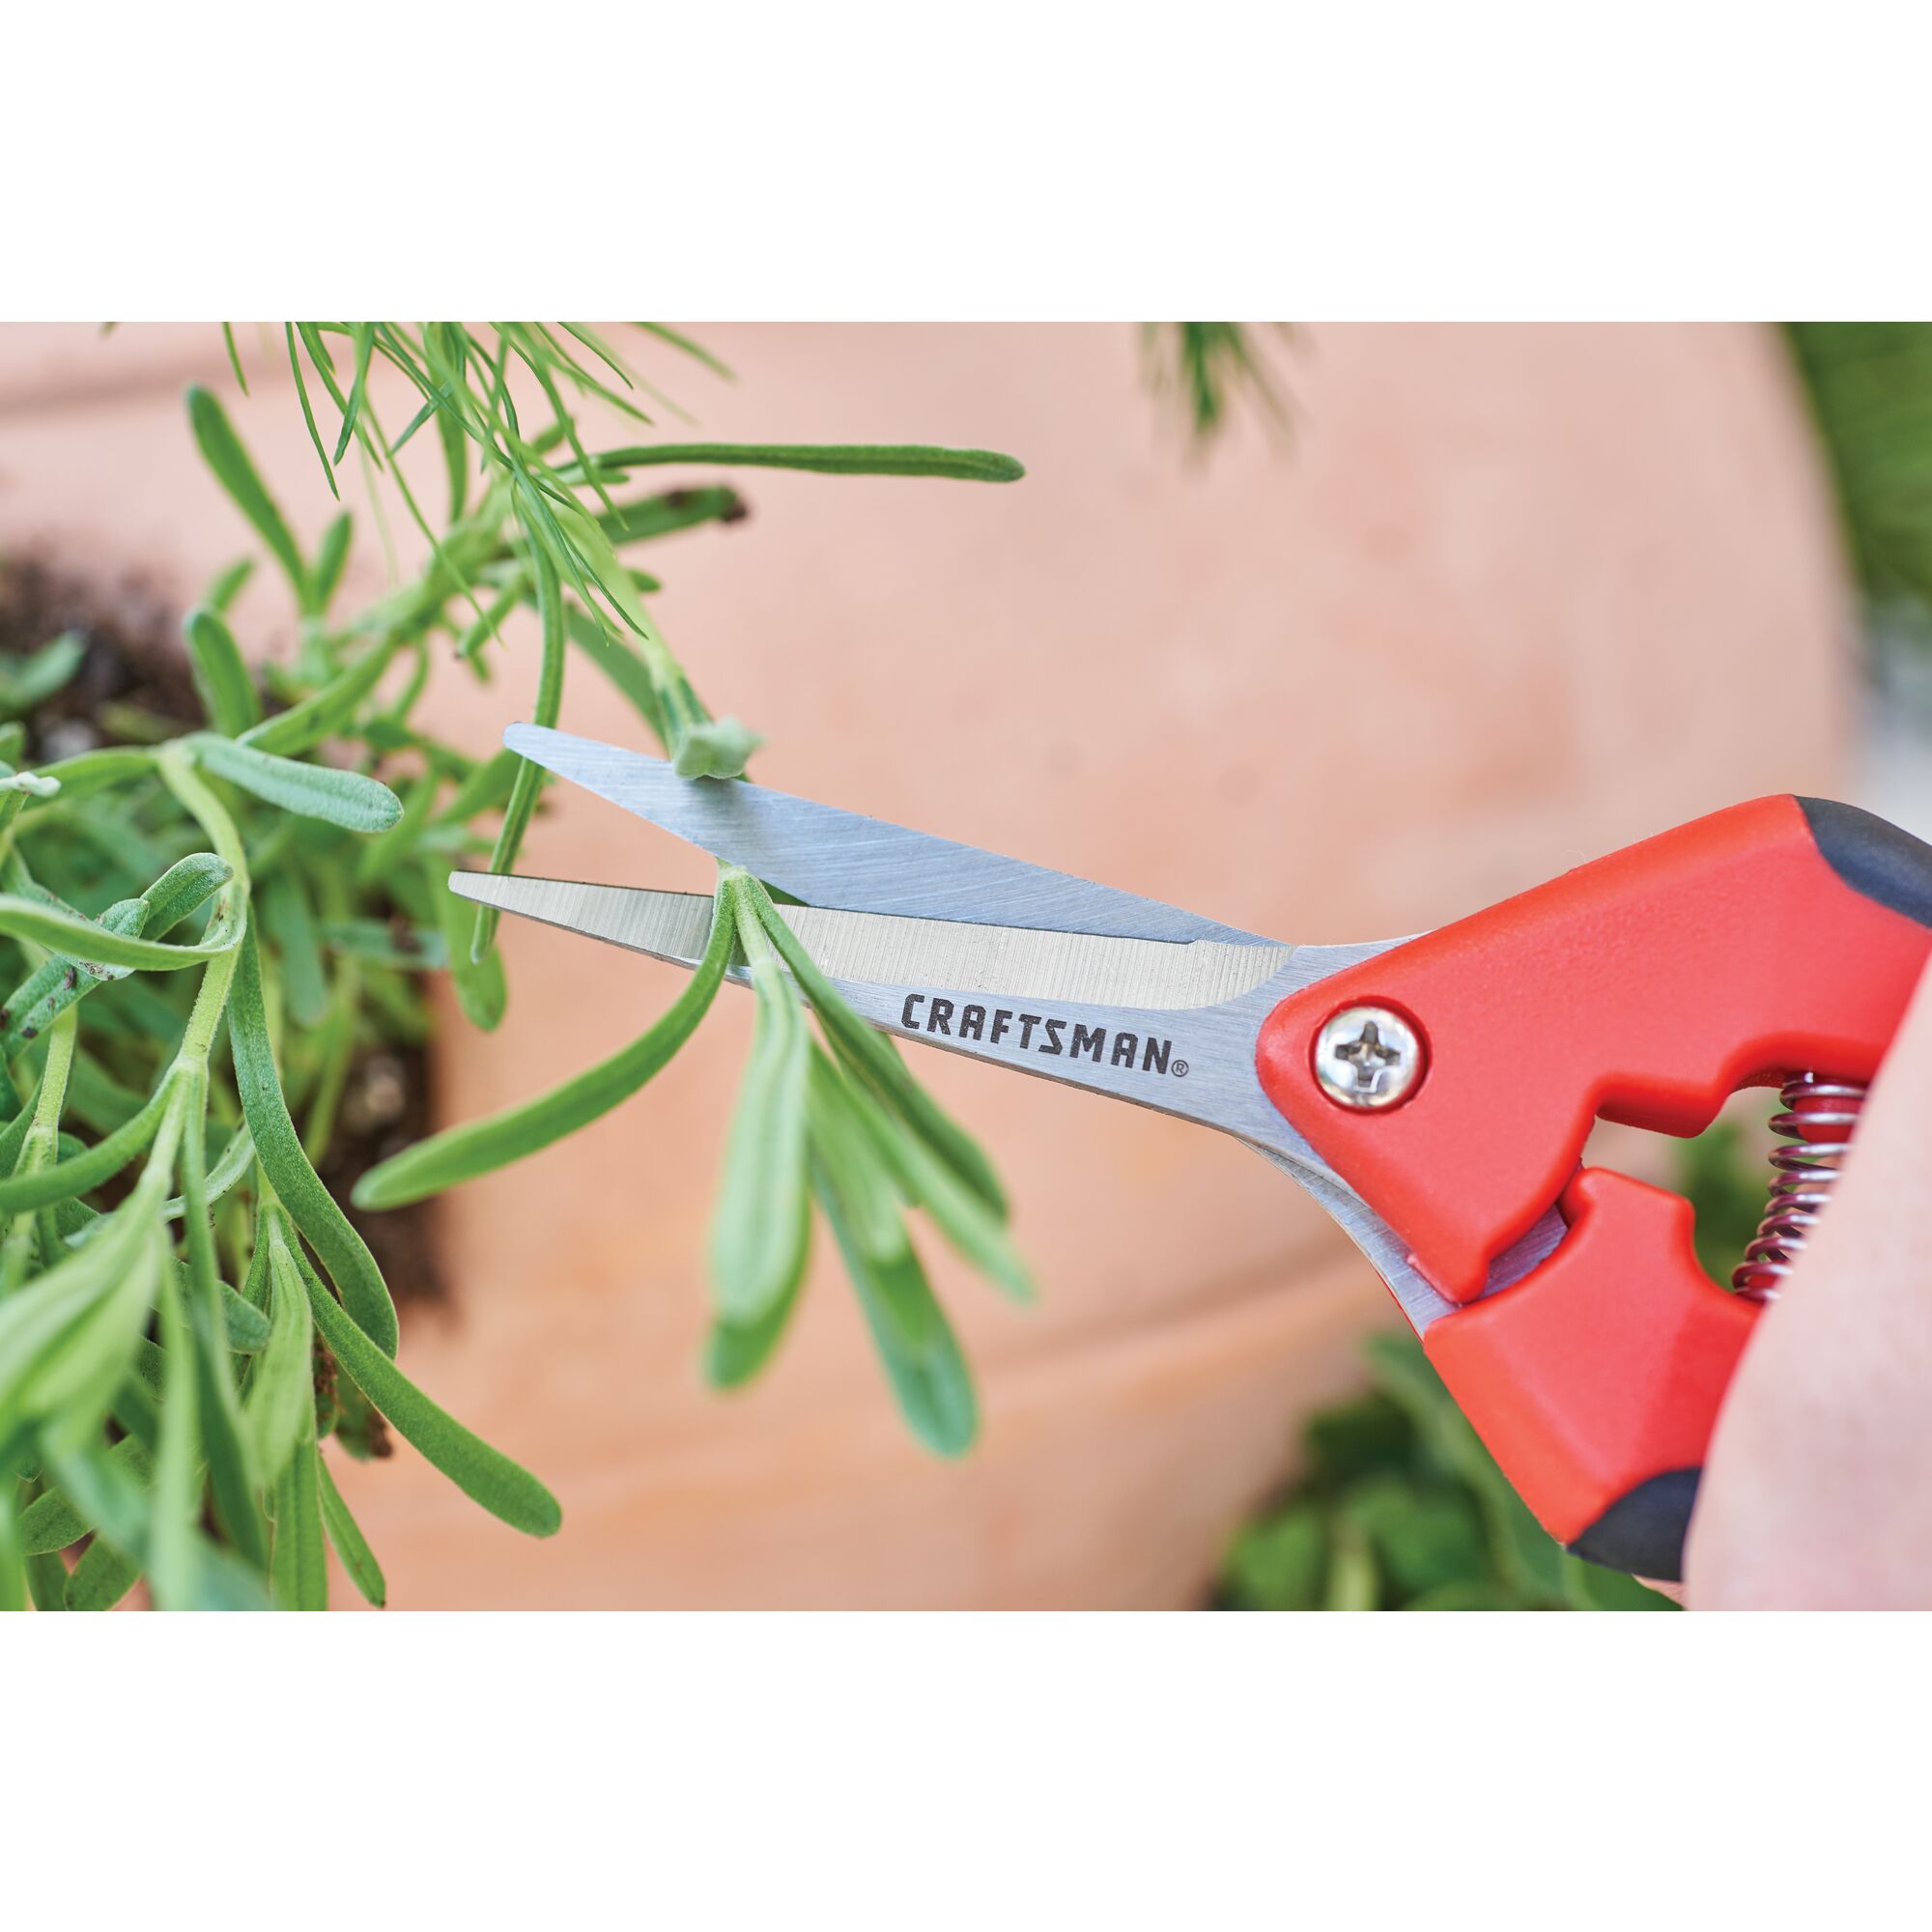 Garden snips being used by a person to cut small household plant.